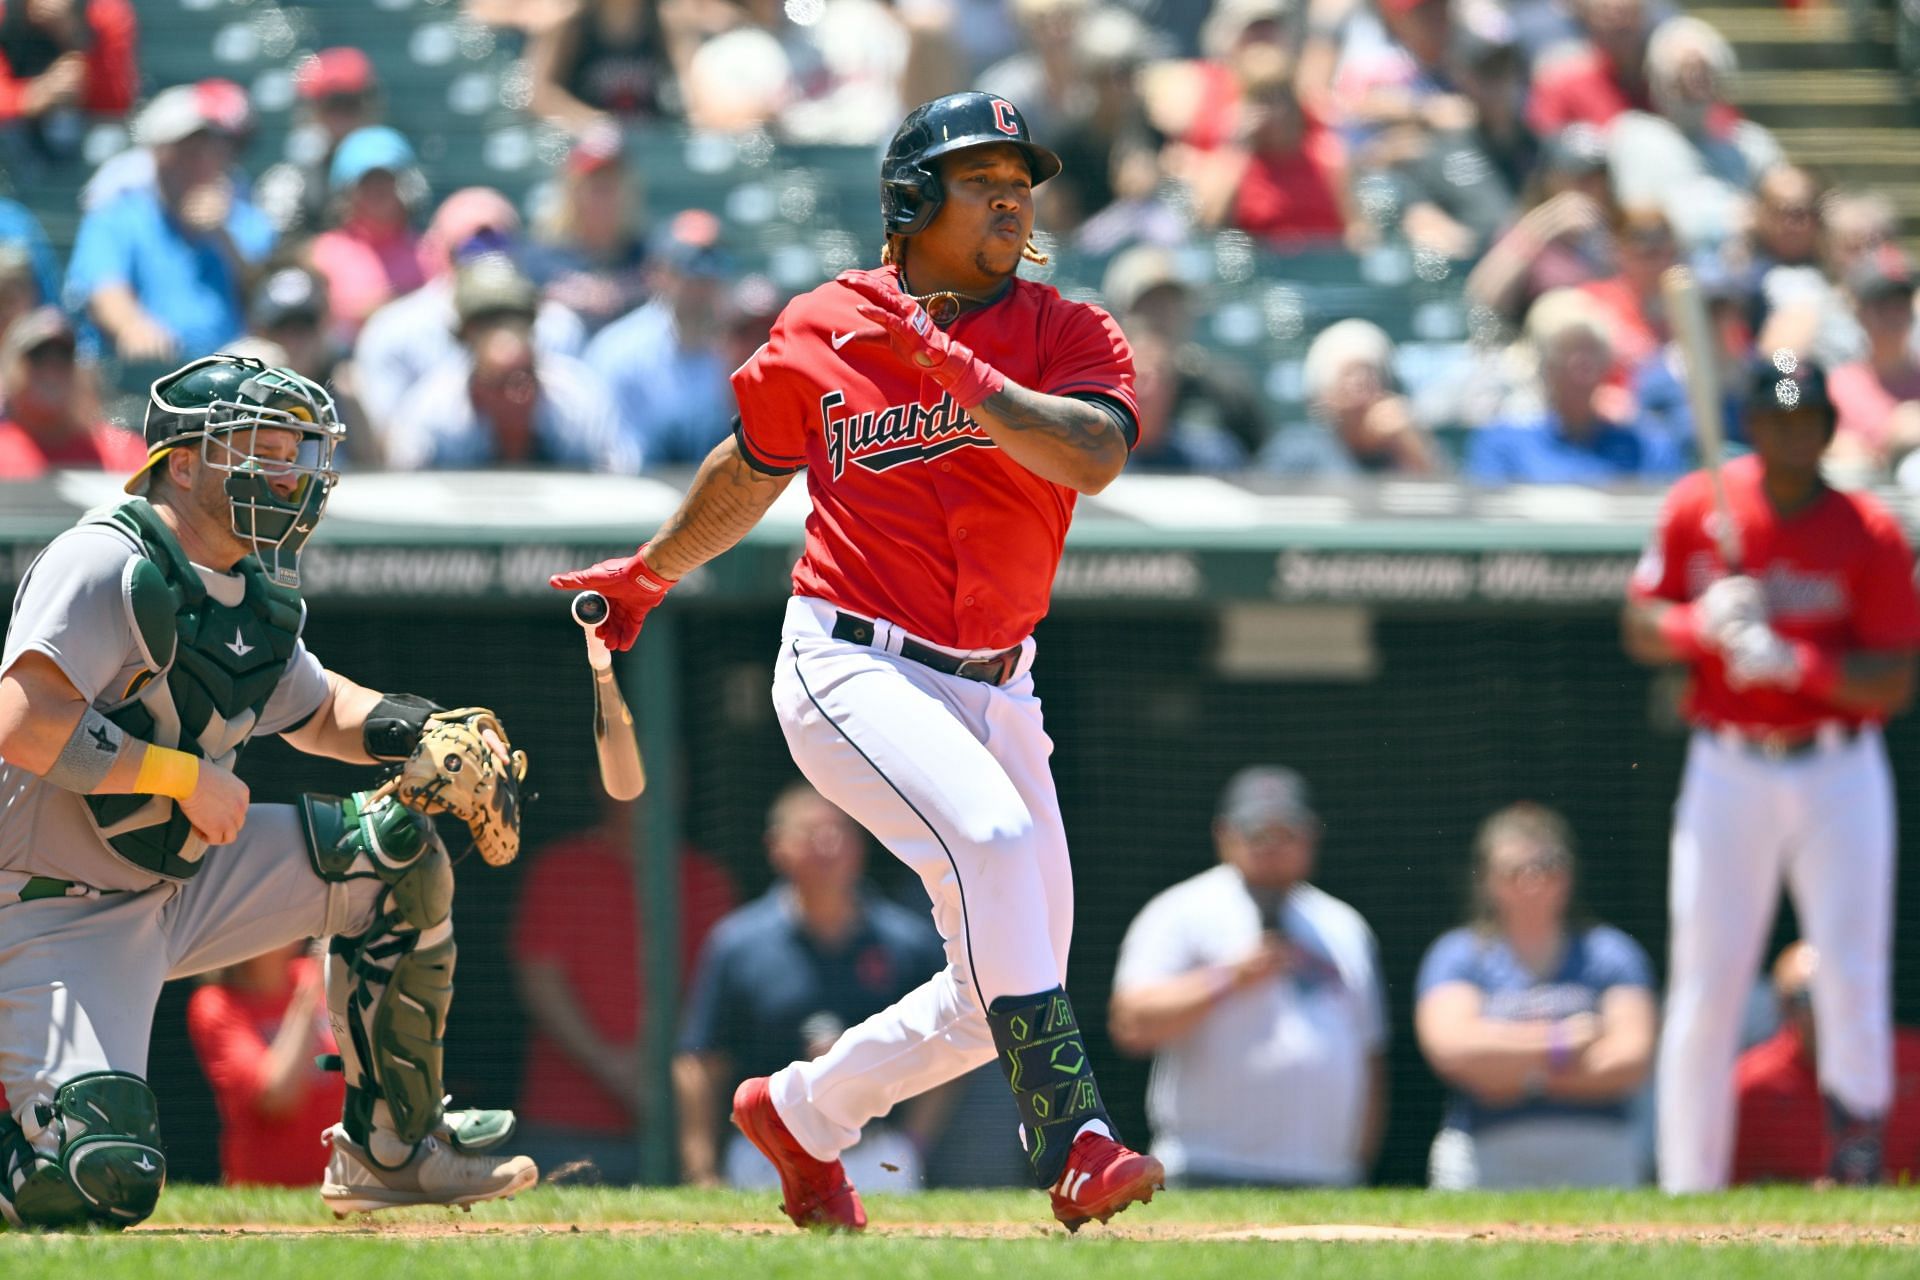 Dominican Jose Ramirez gets a hit for the Cleveland Guardians against the Oakland Athletics.